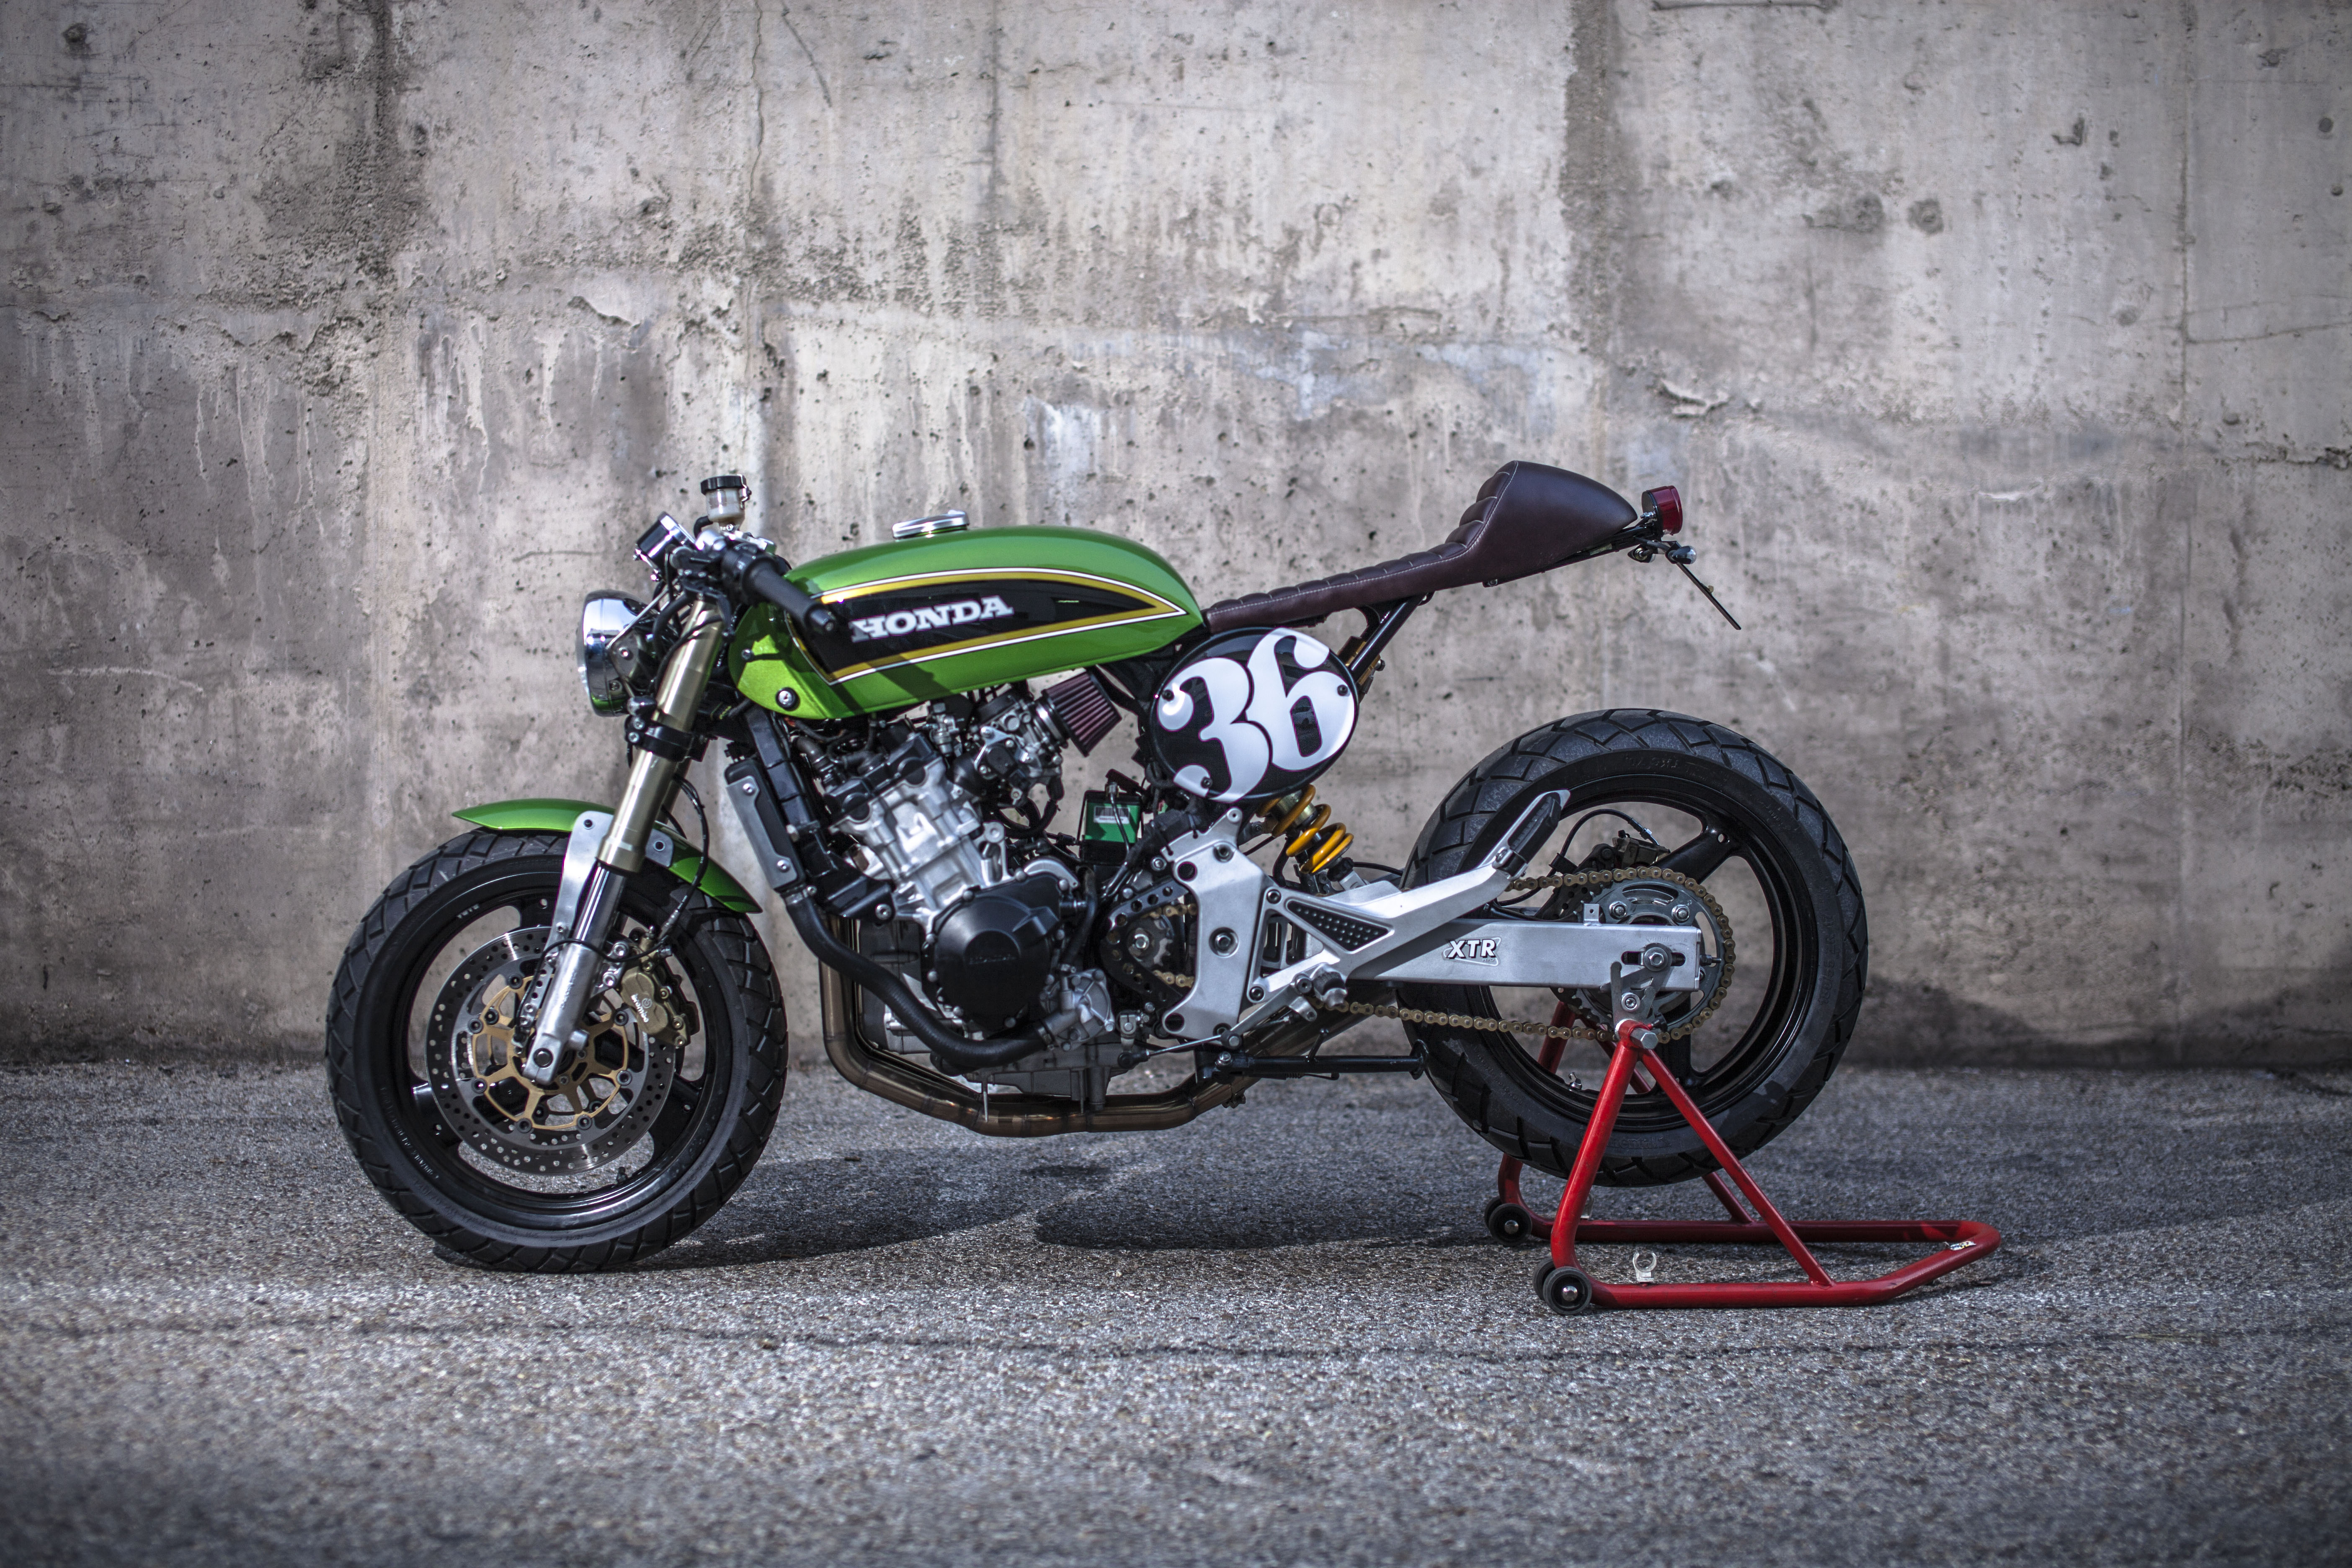 CB600 Cafe Racer by XTR Pepo